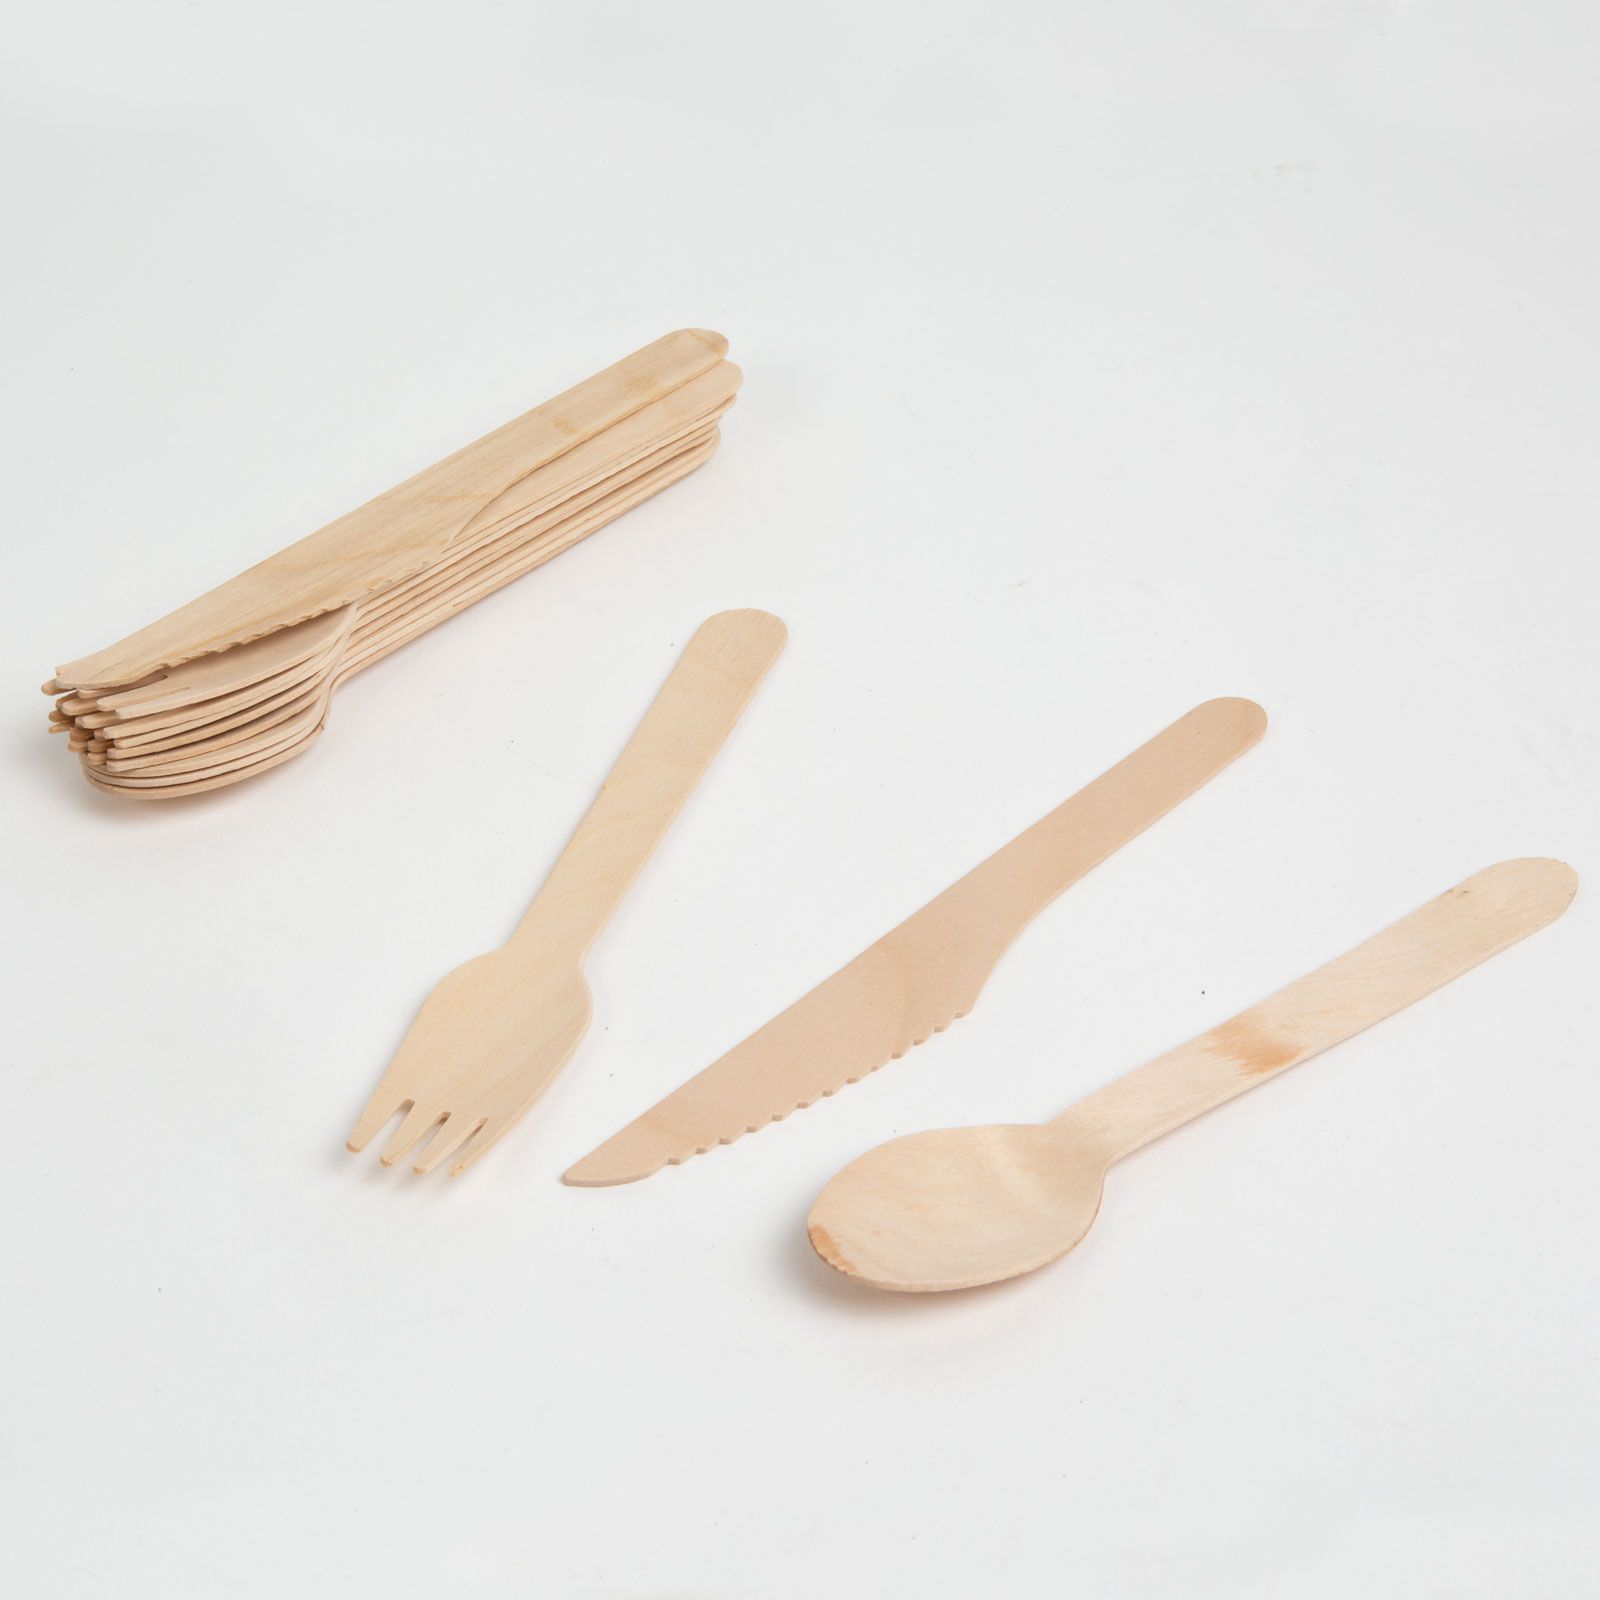 Wooden cutlery set - fork, spoon, knife - 12 pieces thumb